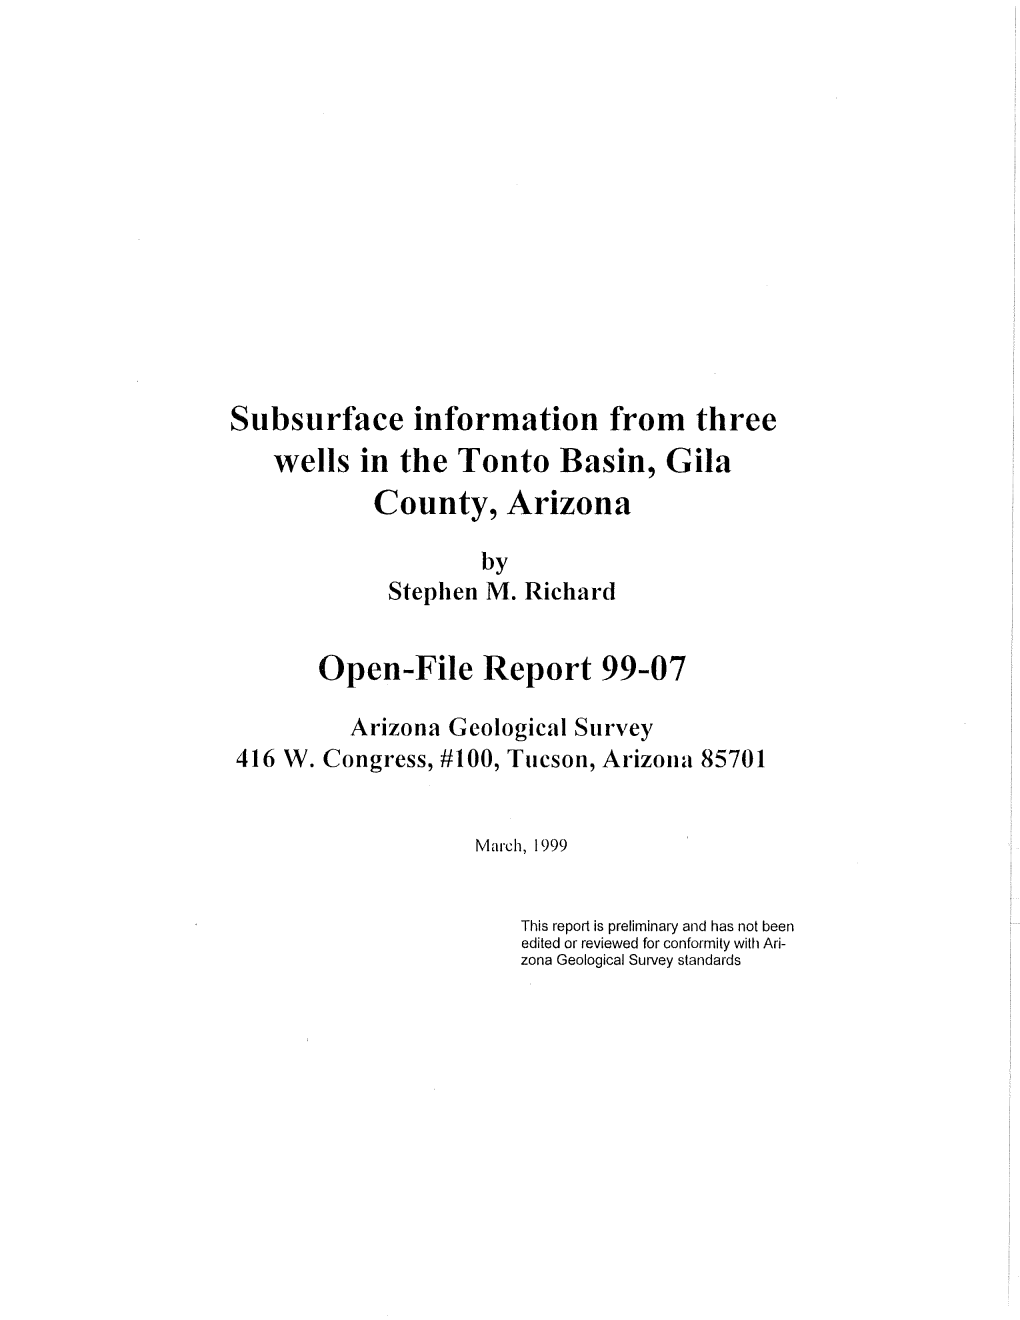 Subsurface Information from Three Wells in the Tonto Basin, Gila County, Arizona by Stephen M